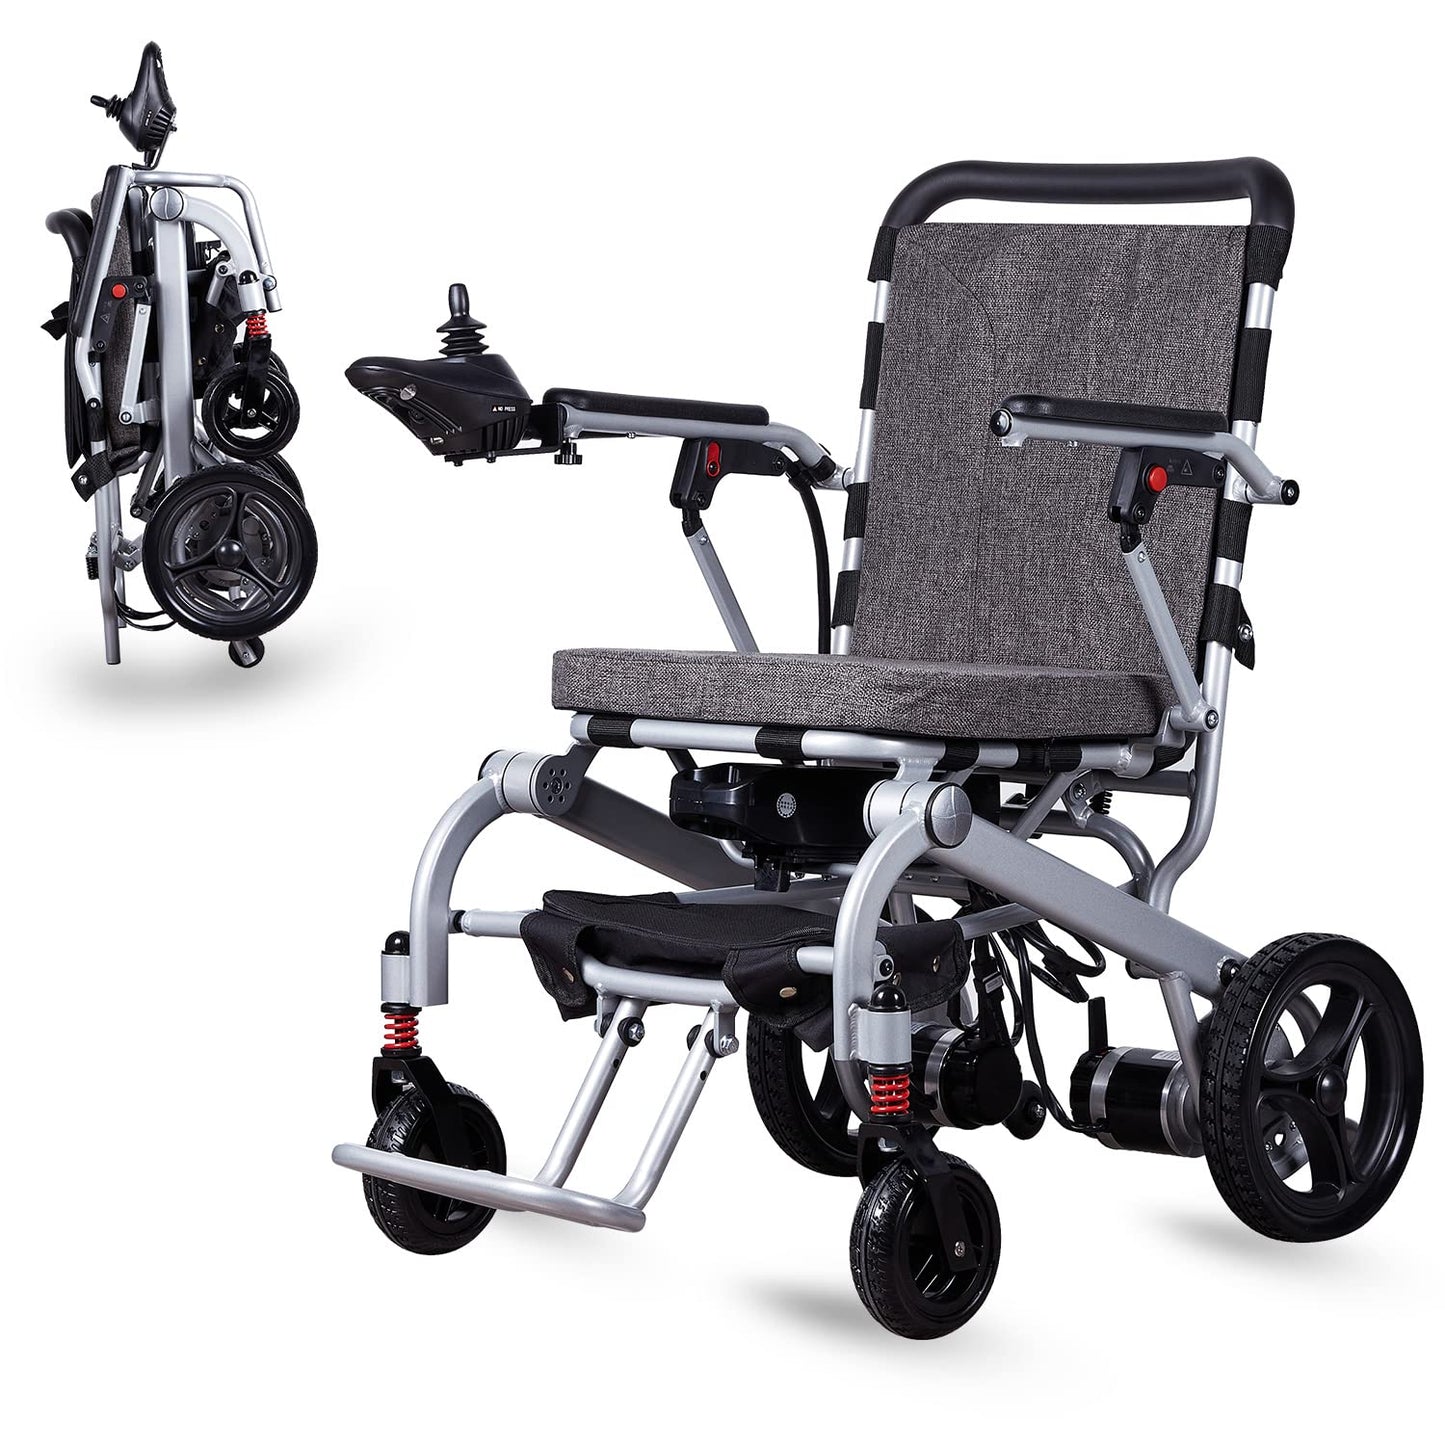 MaritSA Intelligent Lightweight Foldable Electric Wheelchair, Travel Size, Weights only 40 lbs - Serviced from USA (Model3) - PUF HOUSE